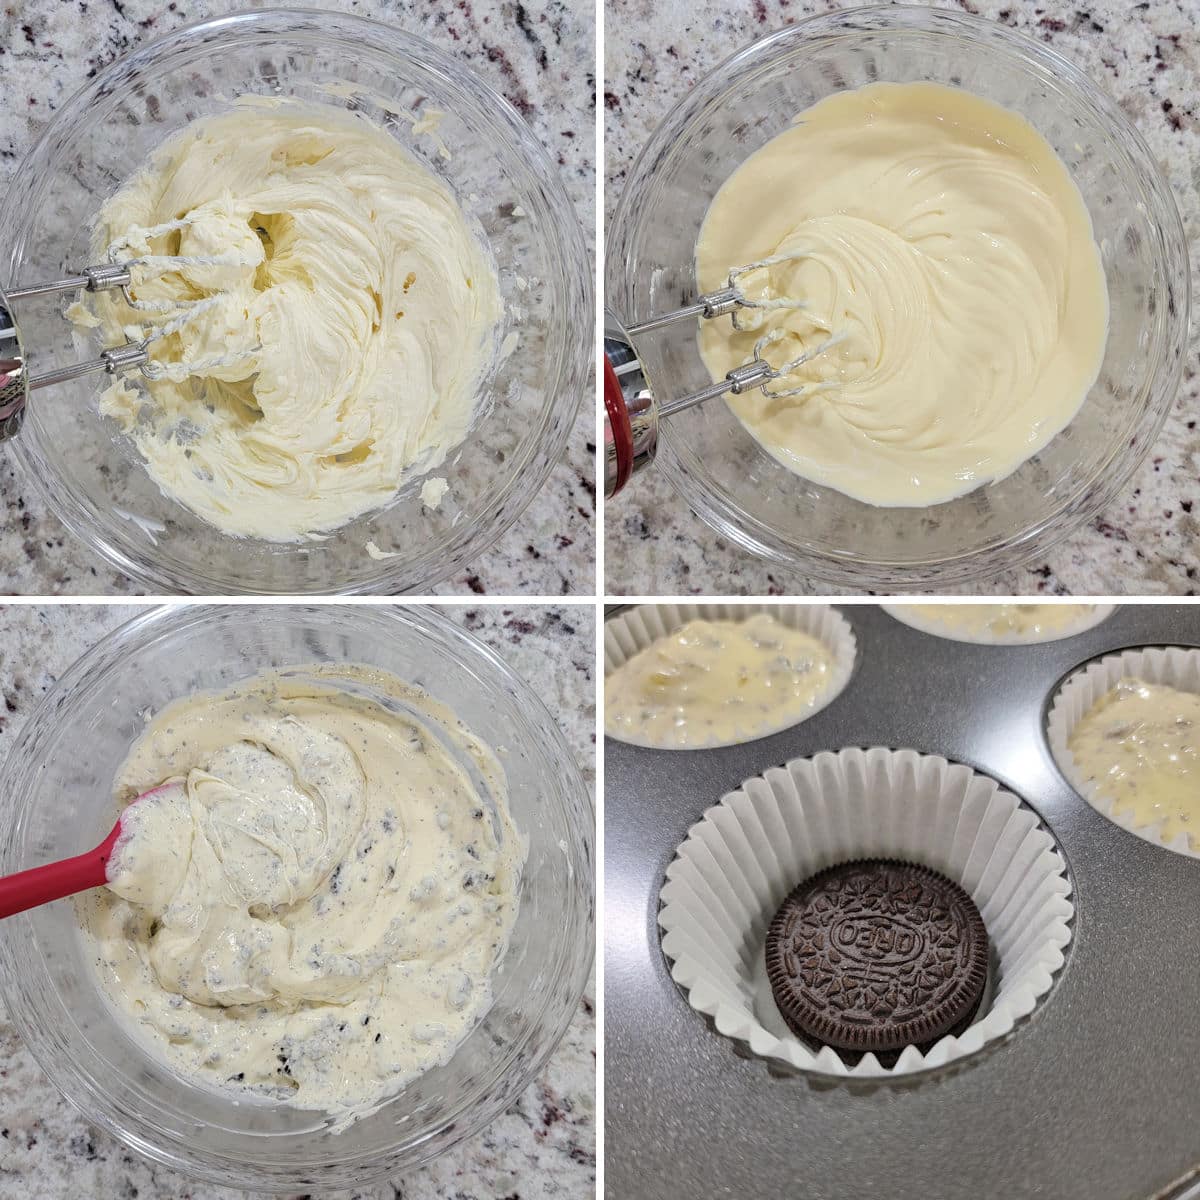 Mixing oreo cheesecake batter in a bowl.